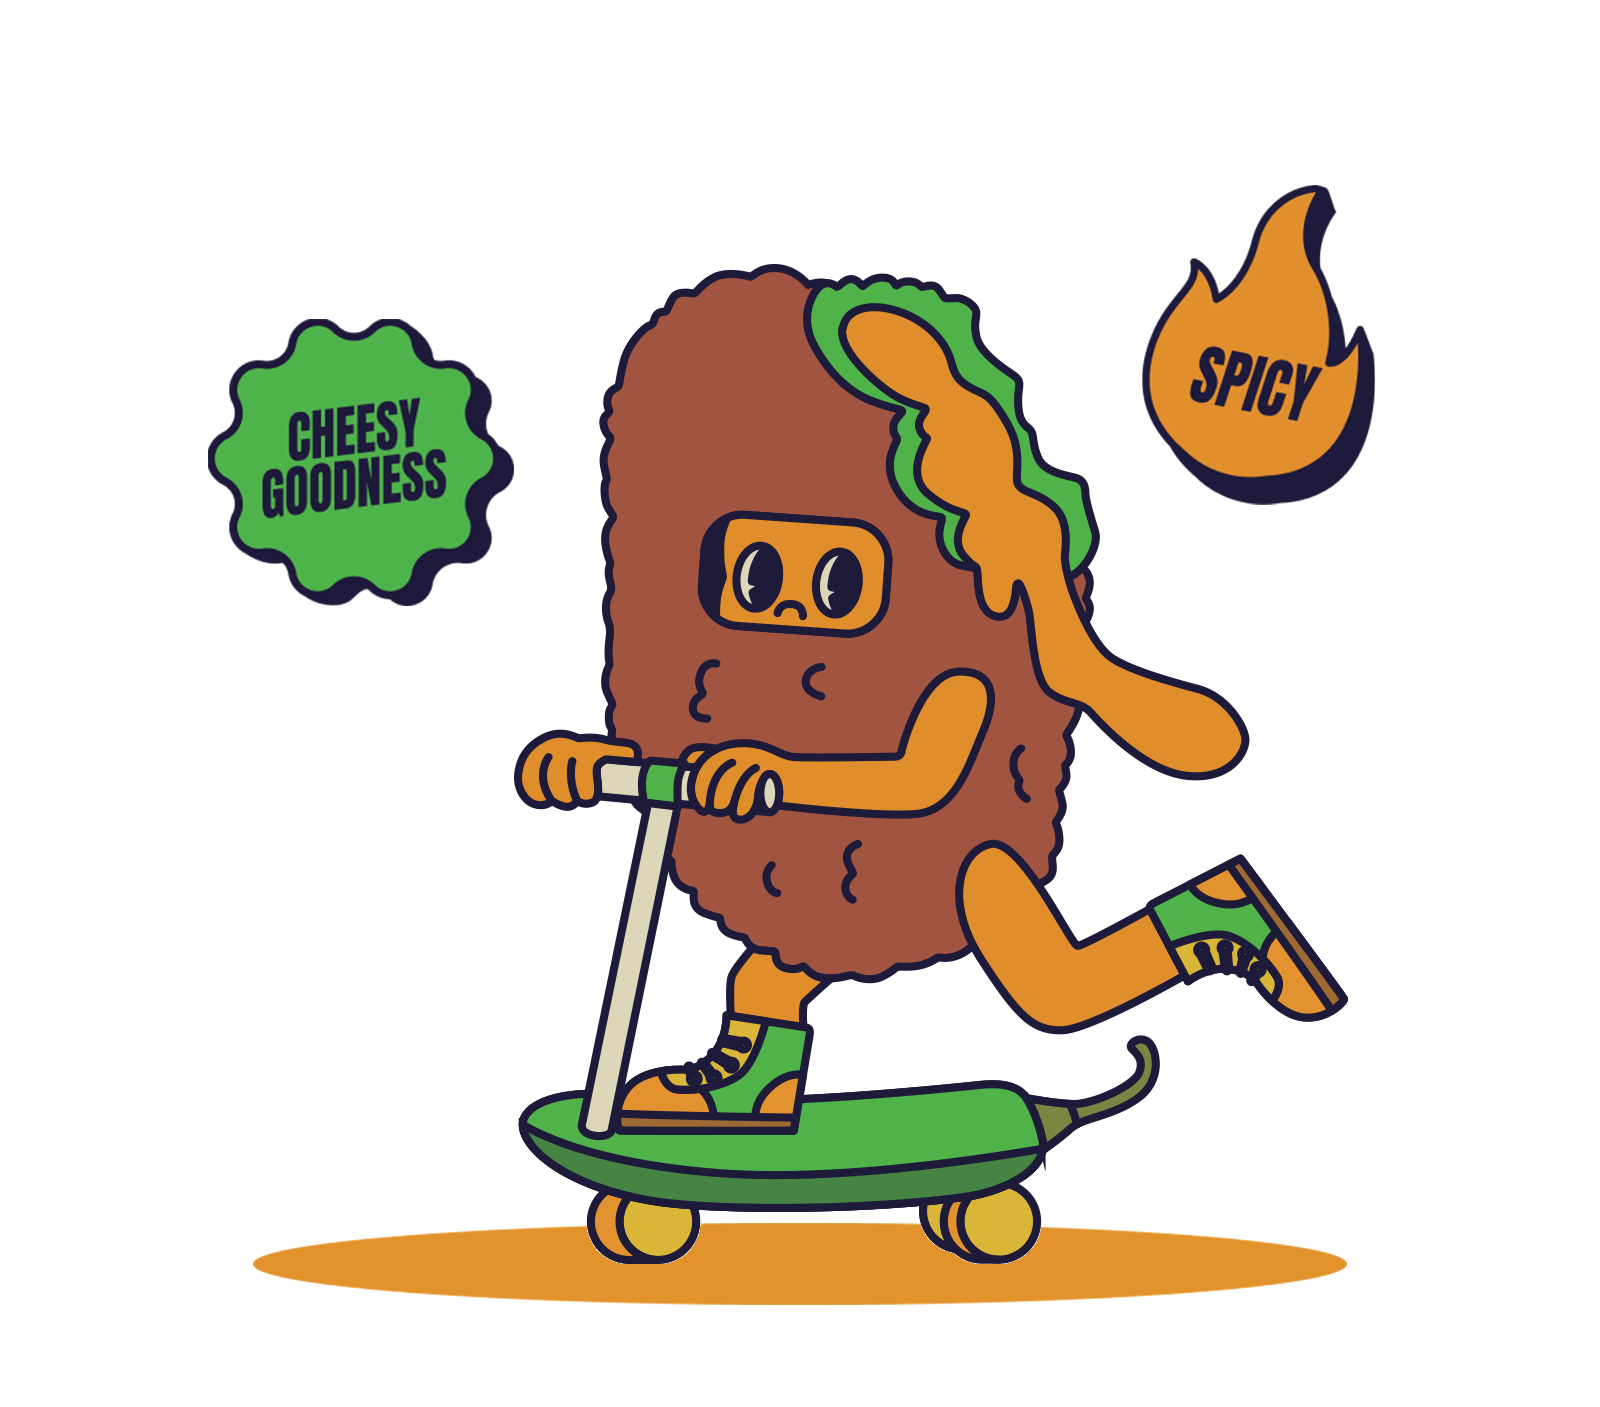 Jalapeño Popper character doing tail whip on scooter